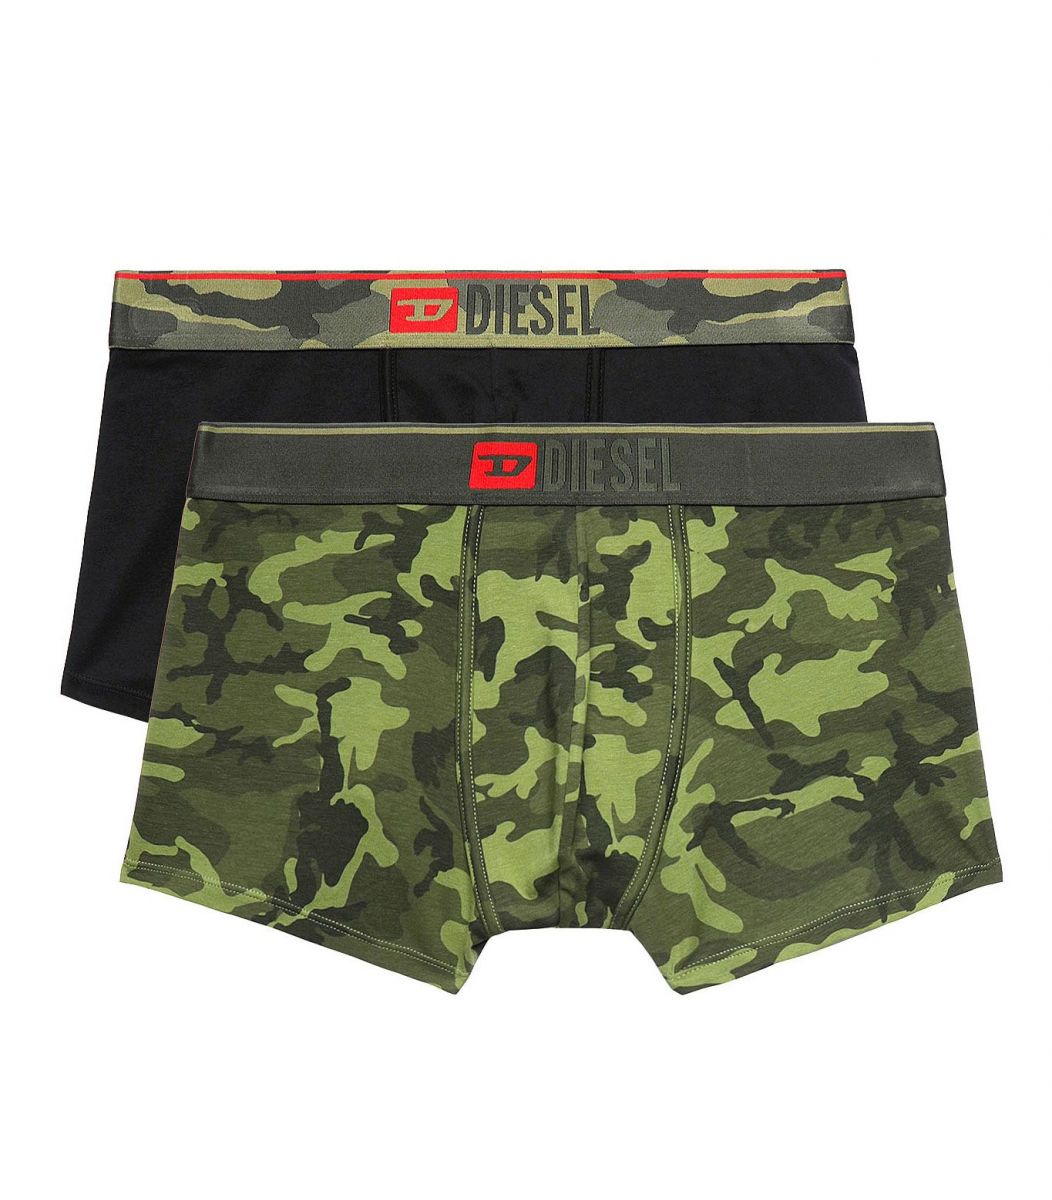  Boxers DIESEL DIESEL Two-pack boxer briefs with camo print 00SMKX-0WCAS-E4944-1